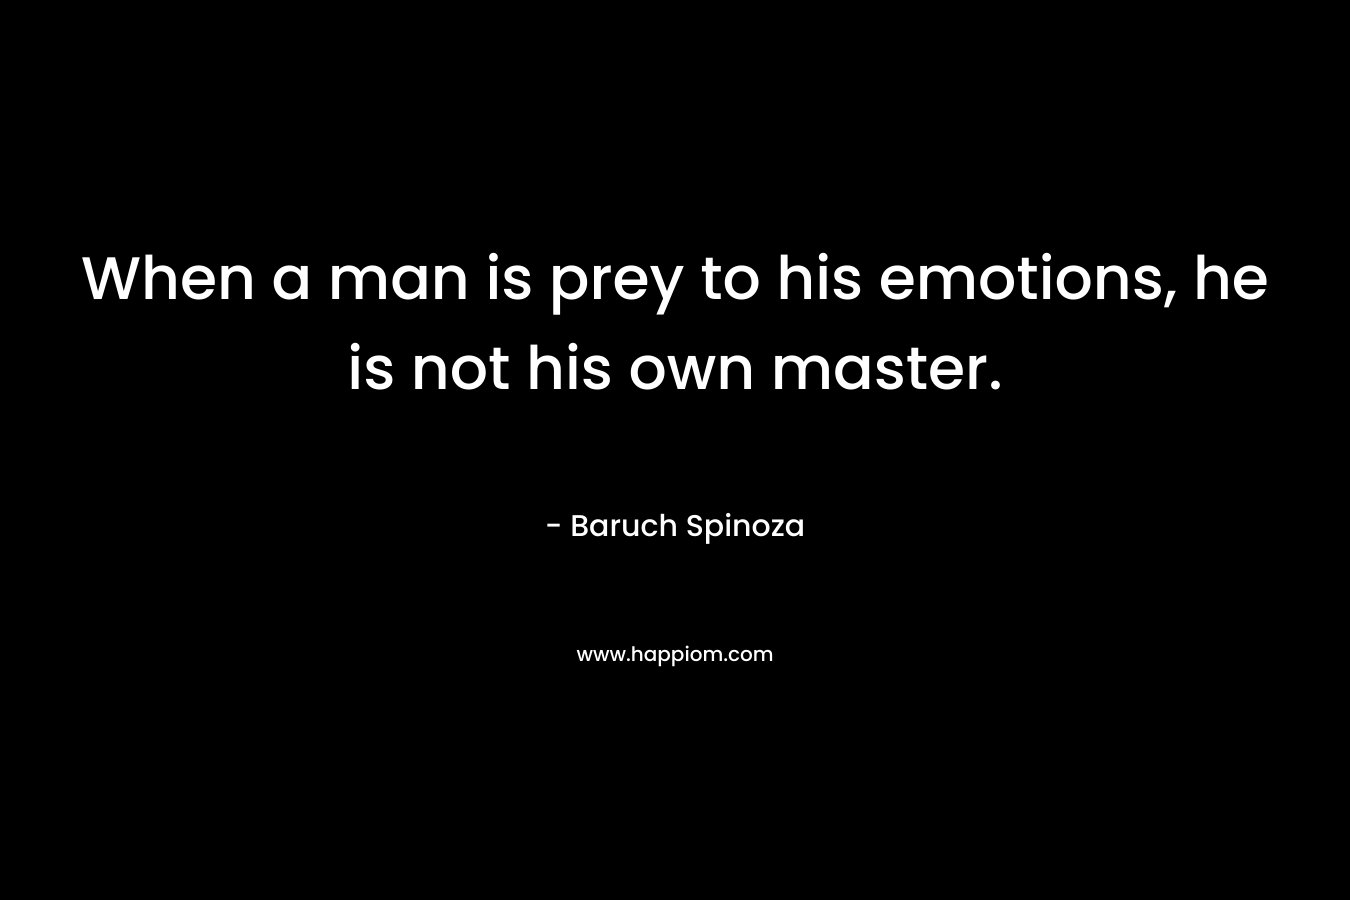 When a man is prey to his emotions, he is not his own master.